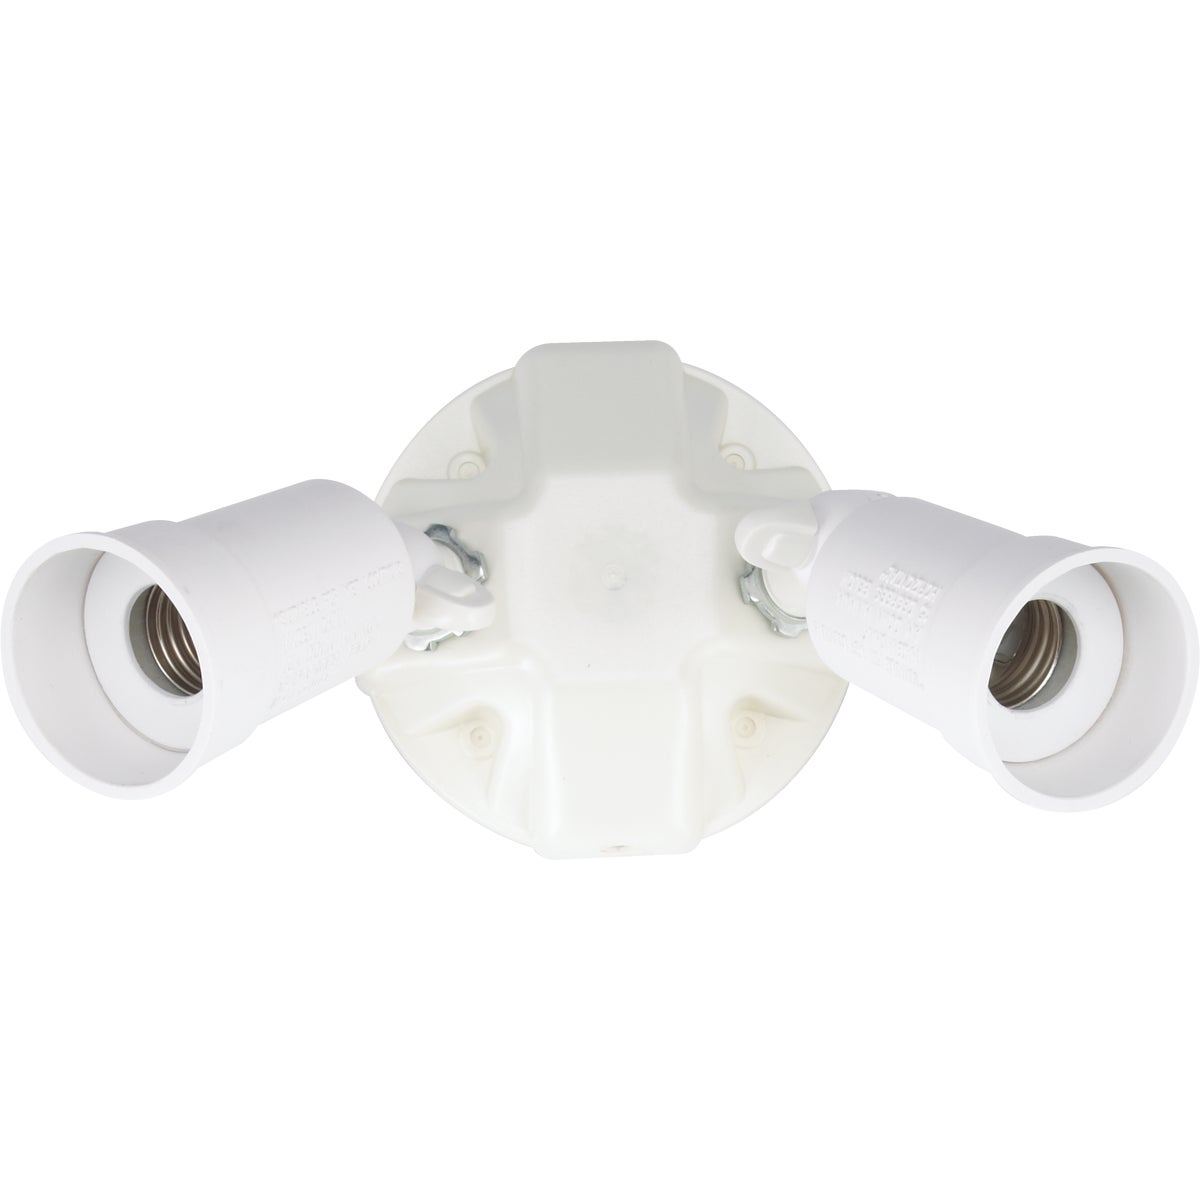 Halo White Dusk To Dawn Incandescent Floodlight Fixture